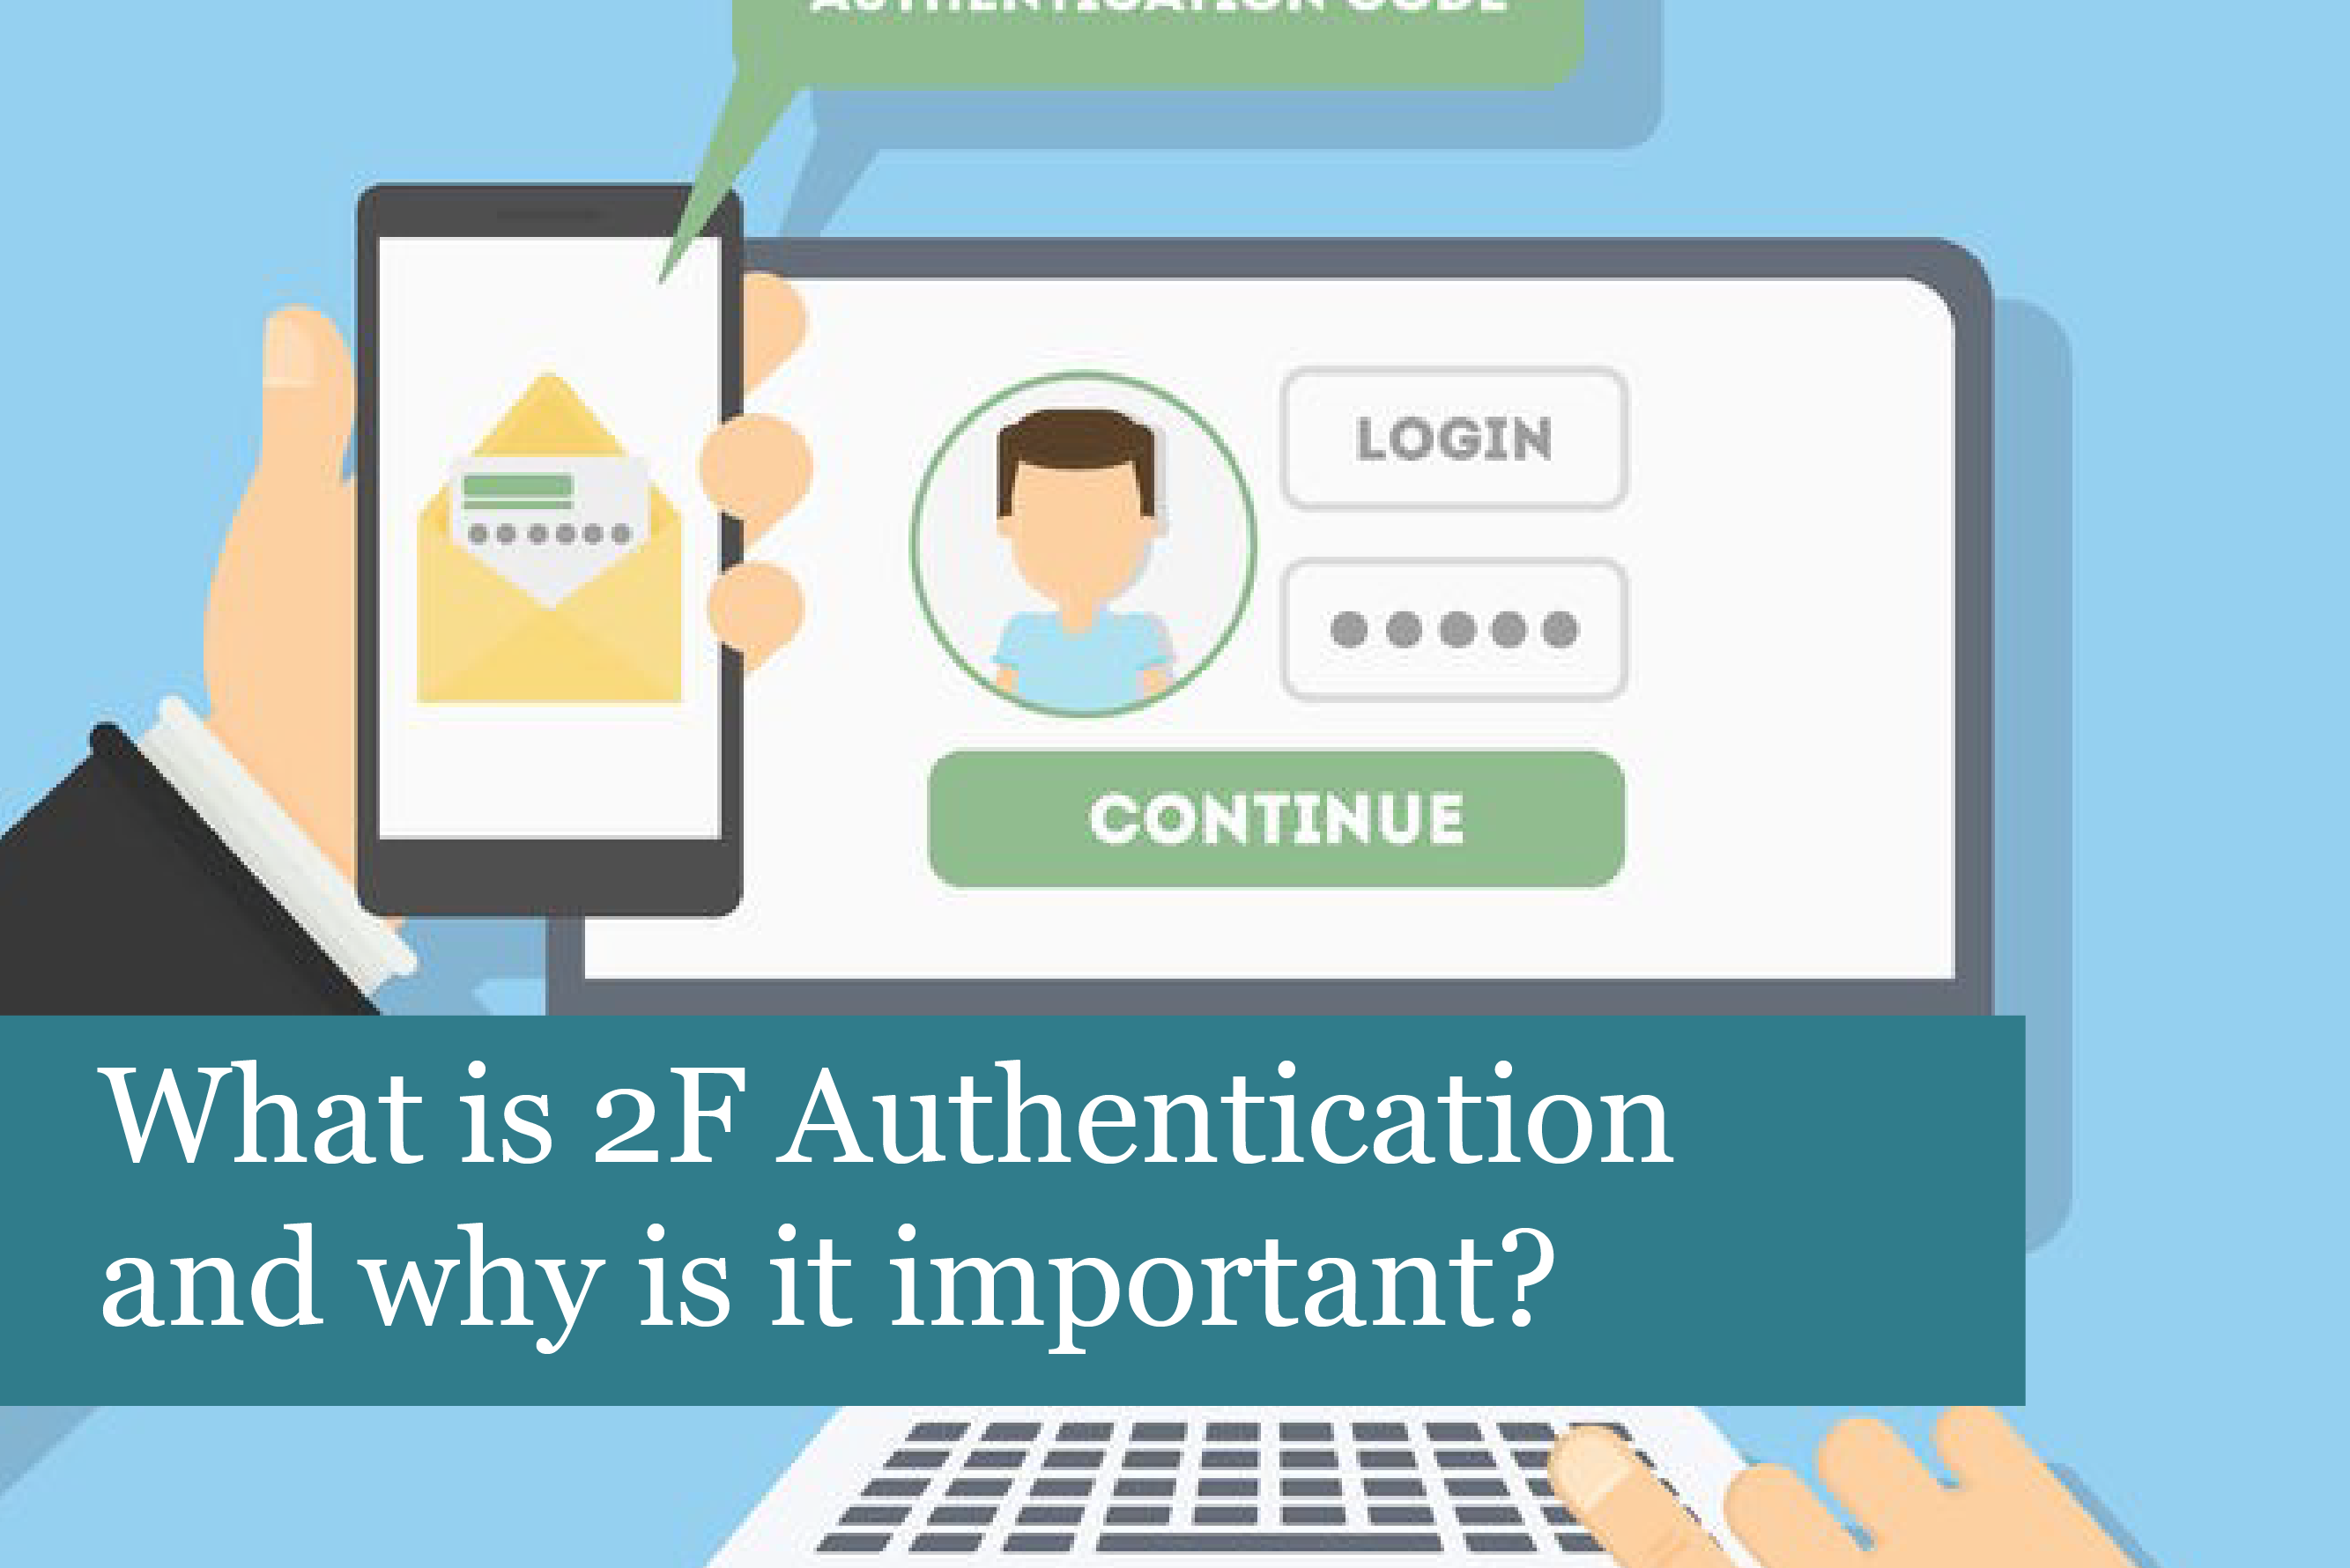 What is Two-Factor Authentication and why is it important? 